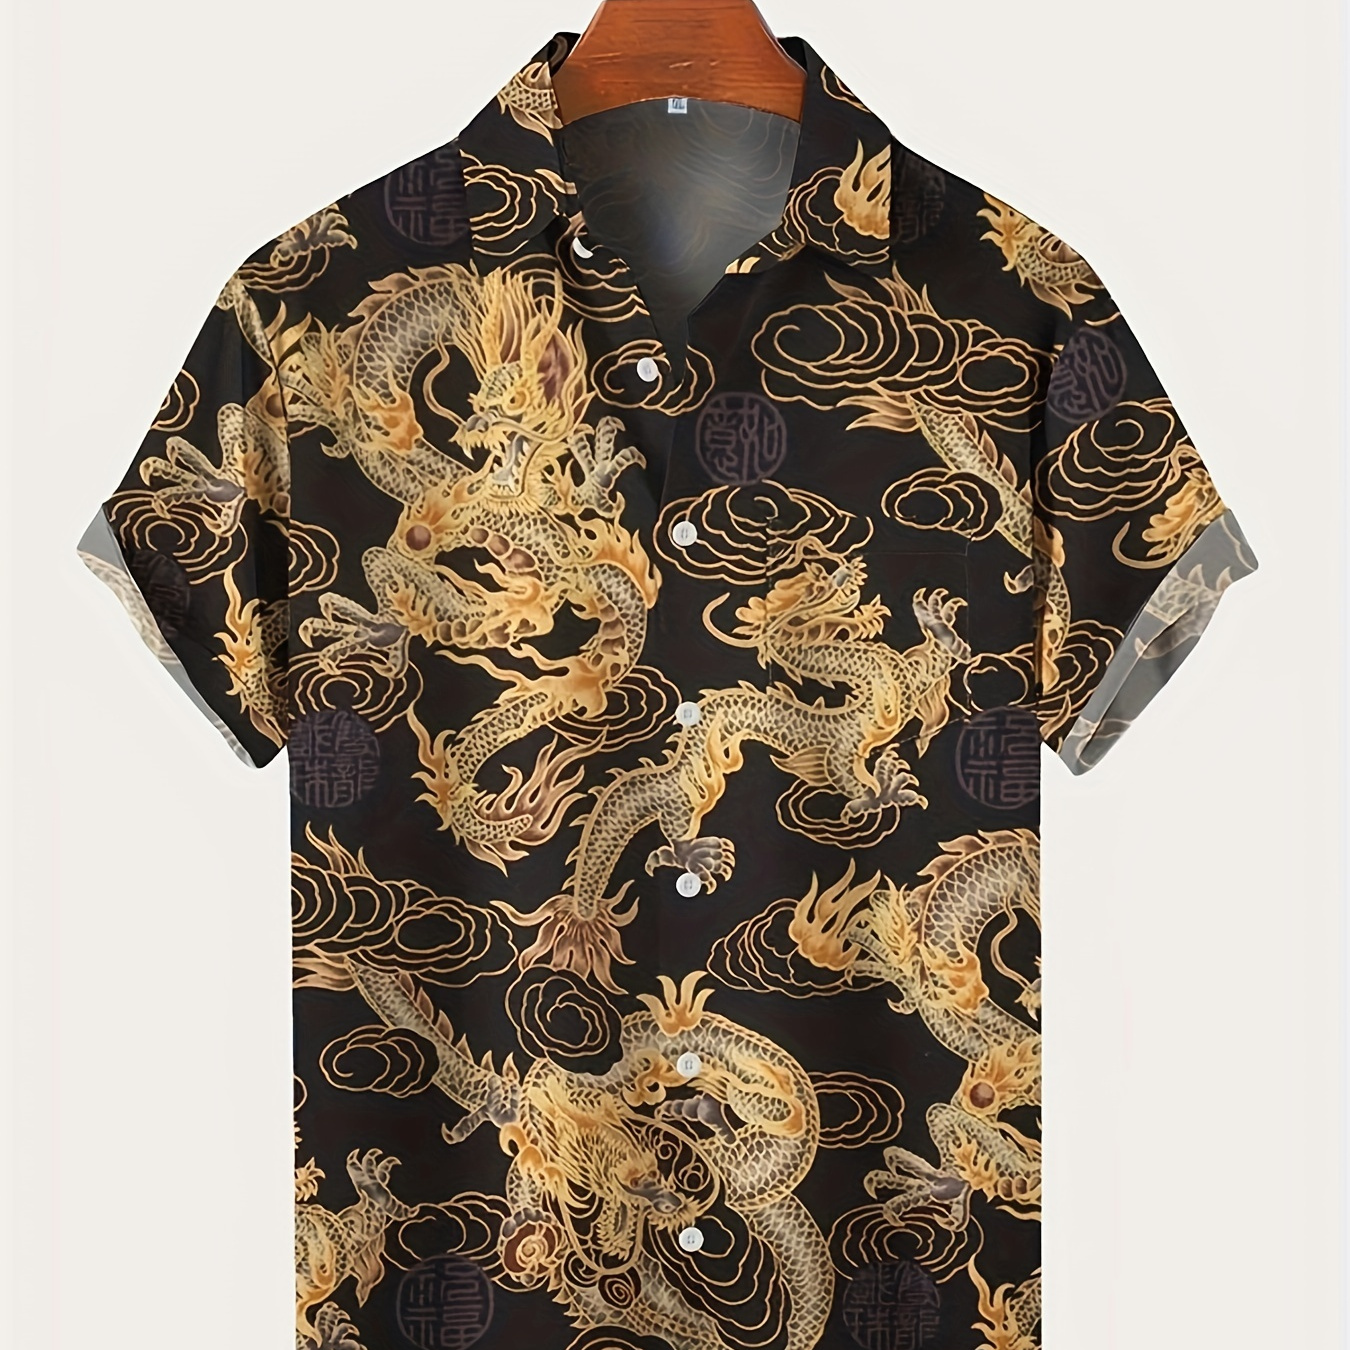 

Plus Size Men's Golden Dragon Graphic Print Shirt Chinese Style Top For Summer, Men's Clothing